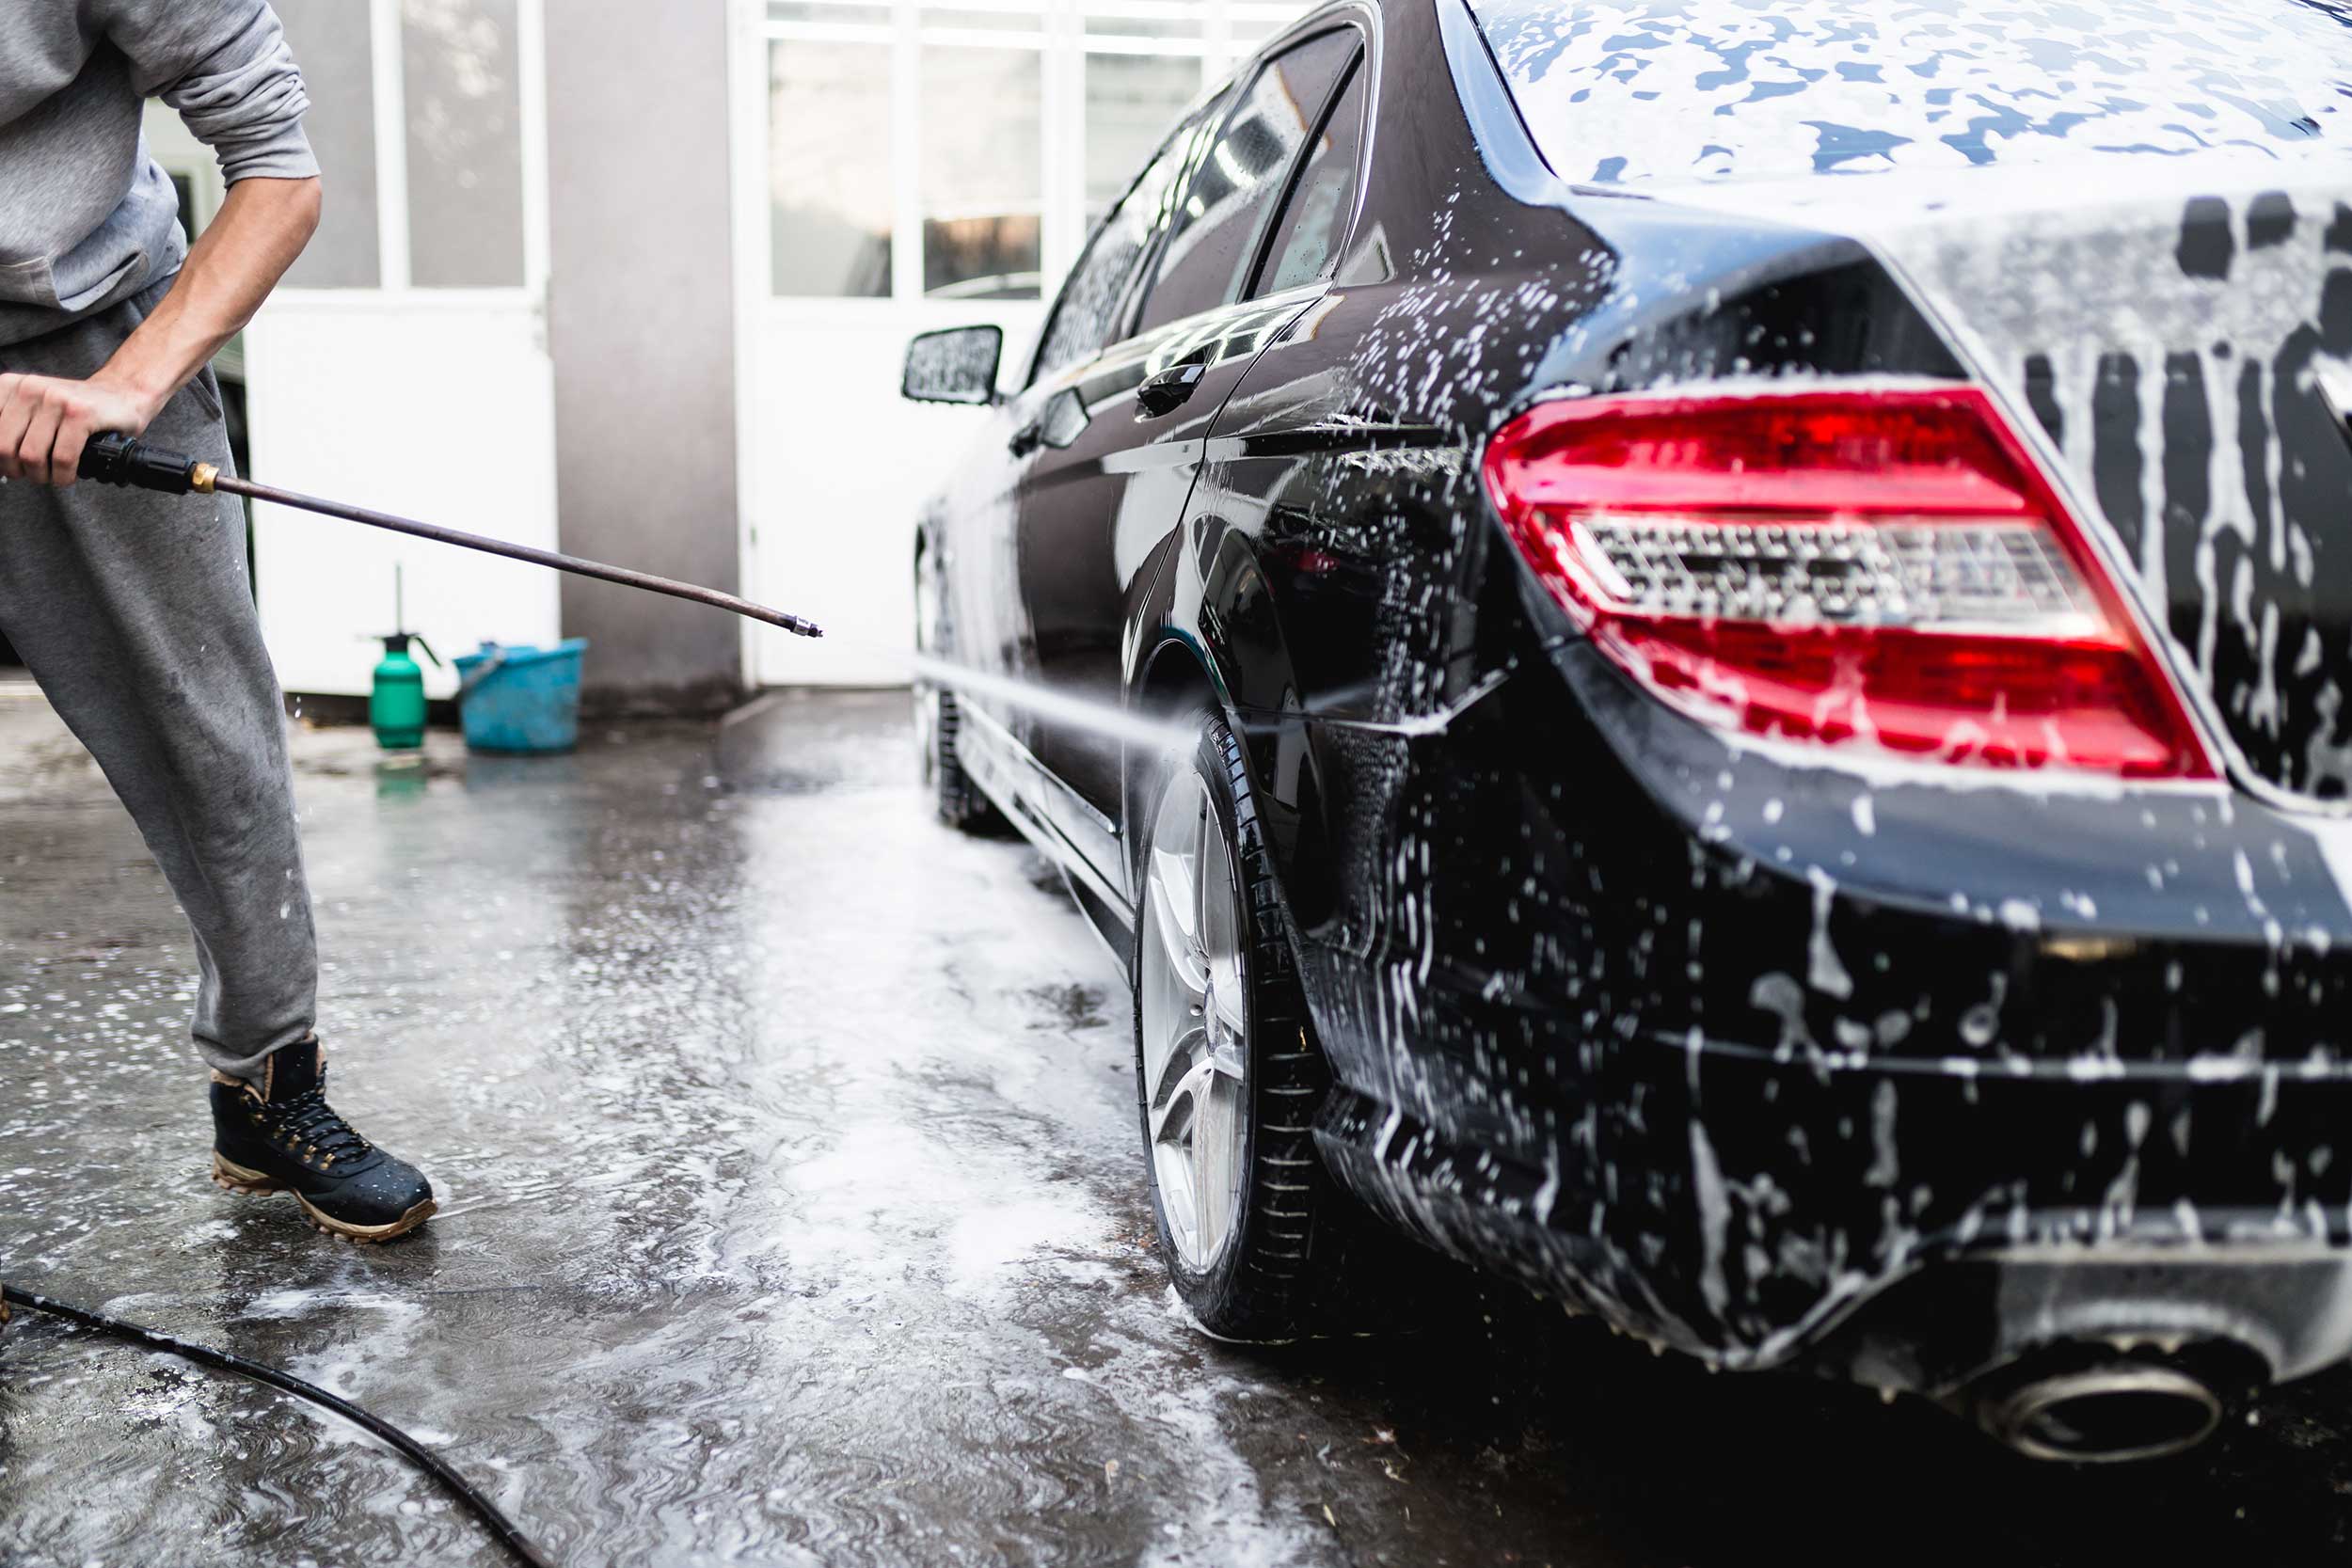 How To Start A Car Wash Business | The Complete Guide For Beginners